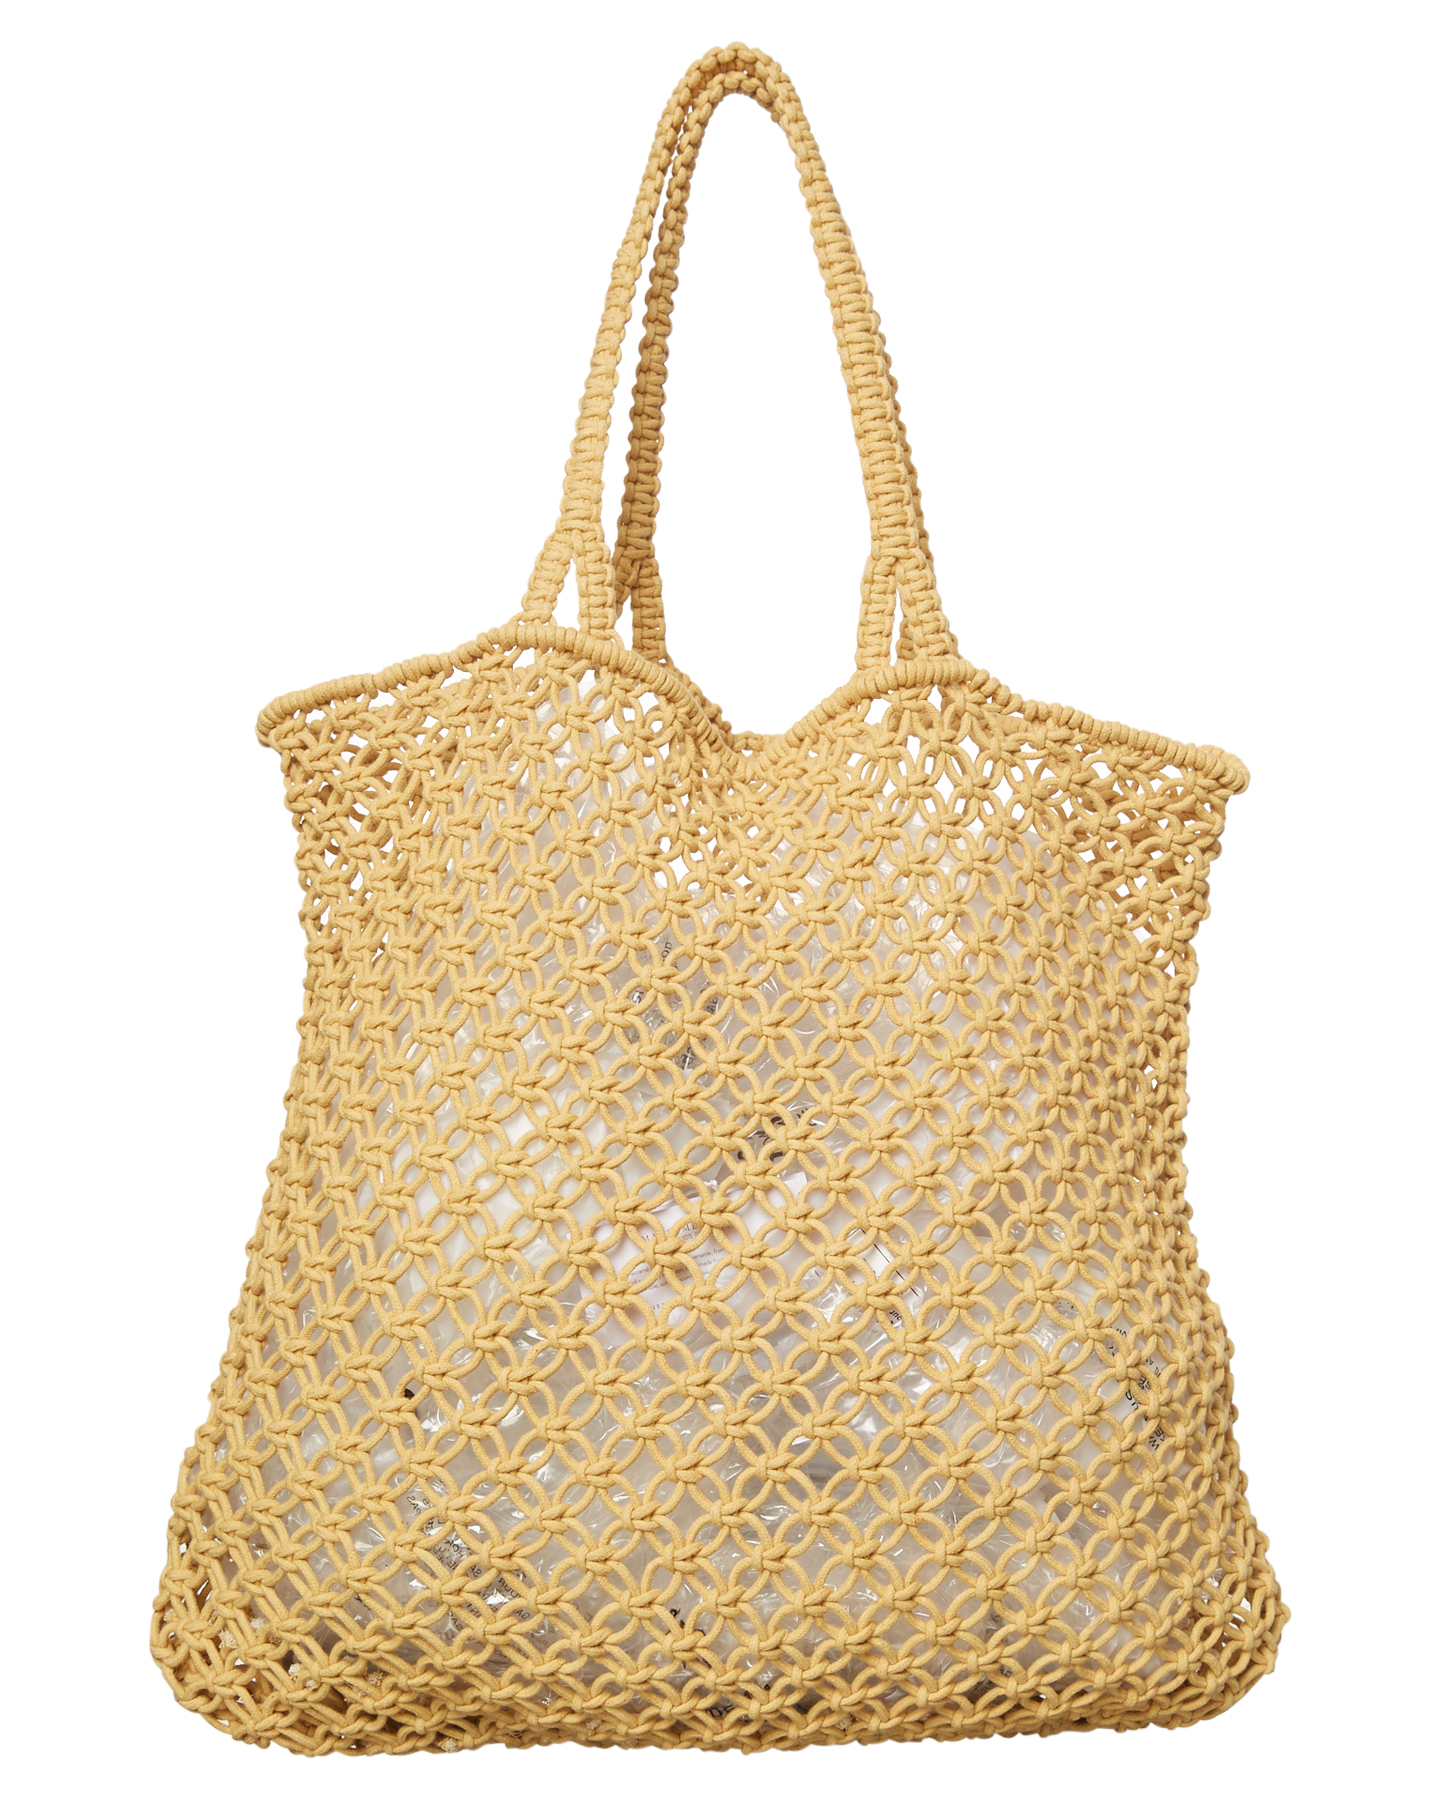 The Beach People Natural Macrame Bag - Natural | SurfStitch